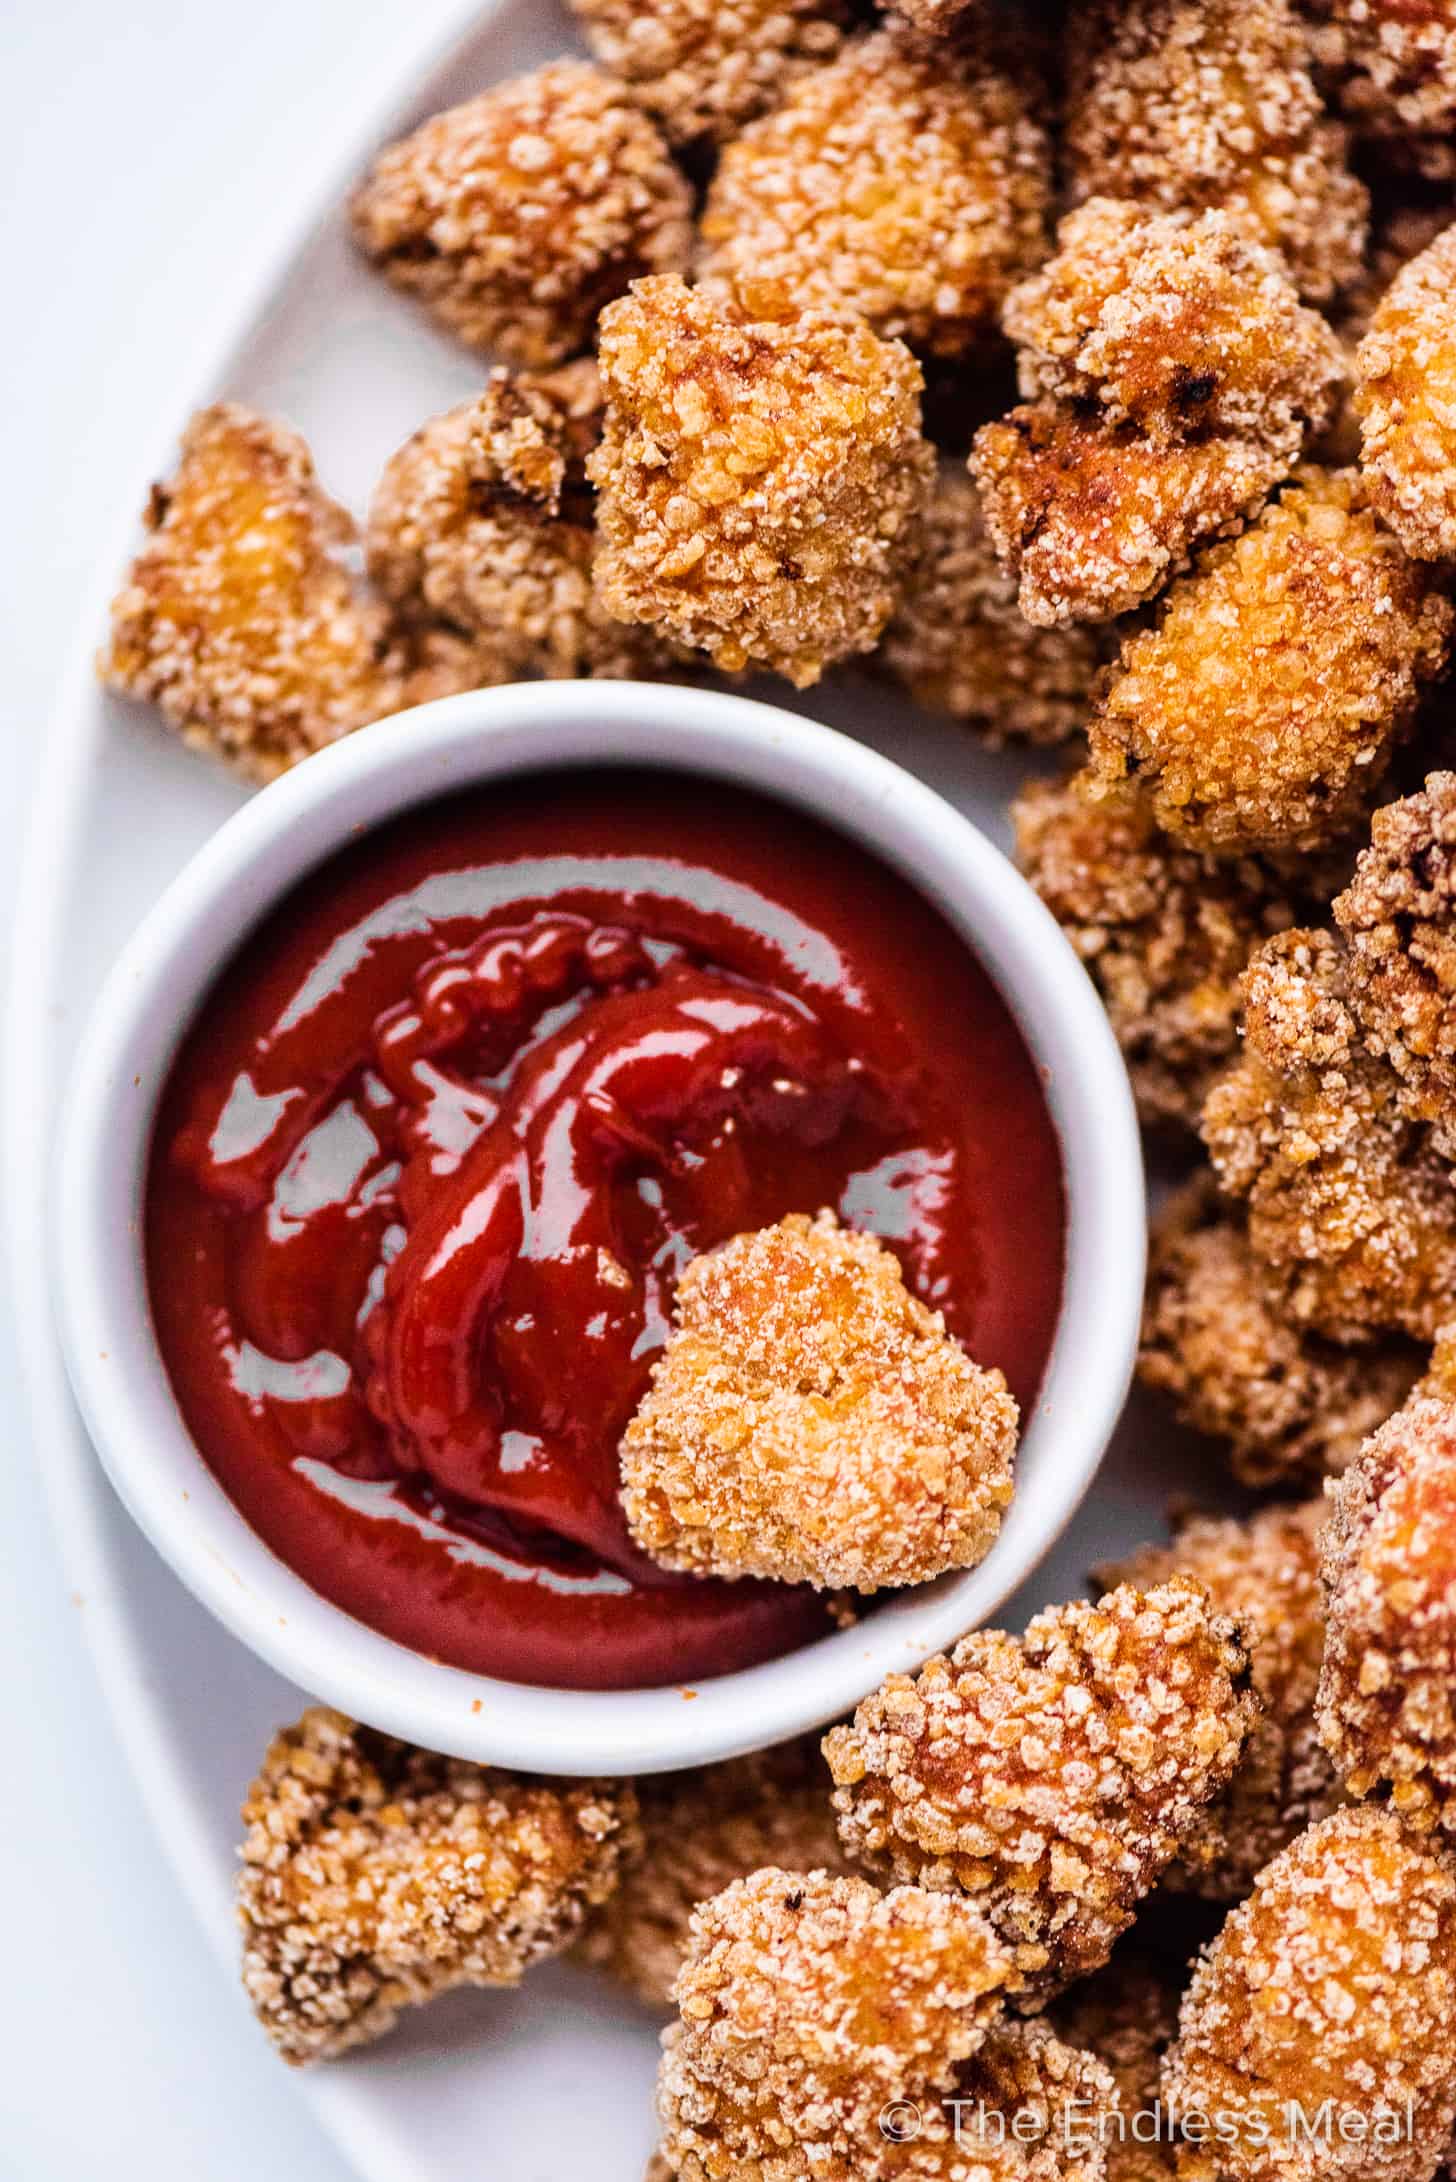 A crispy fried chicken bite being dipped into ketchup.